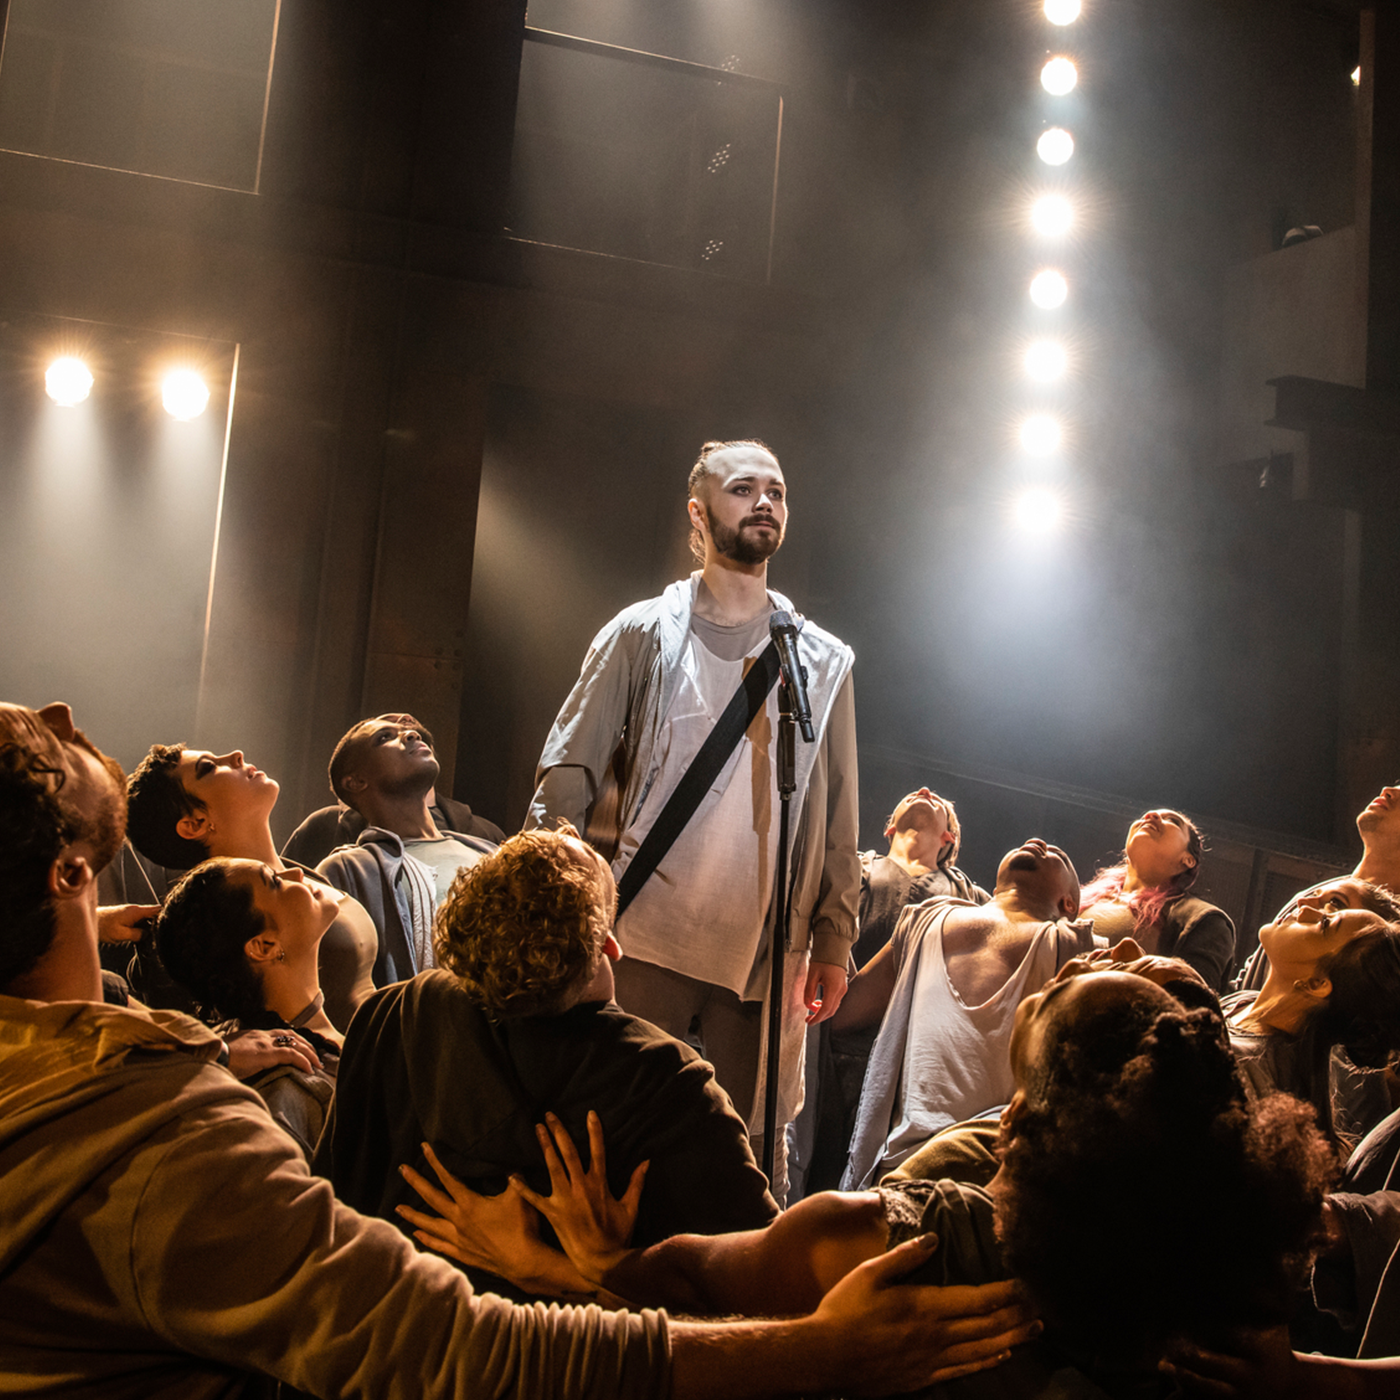 Jesus Christ Superstar is live at the Buell Theatre this week and Colorado's own Joshua Bess called in with Tracy & Fizz to talk about performing in the show in his hometown